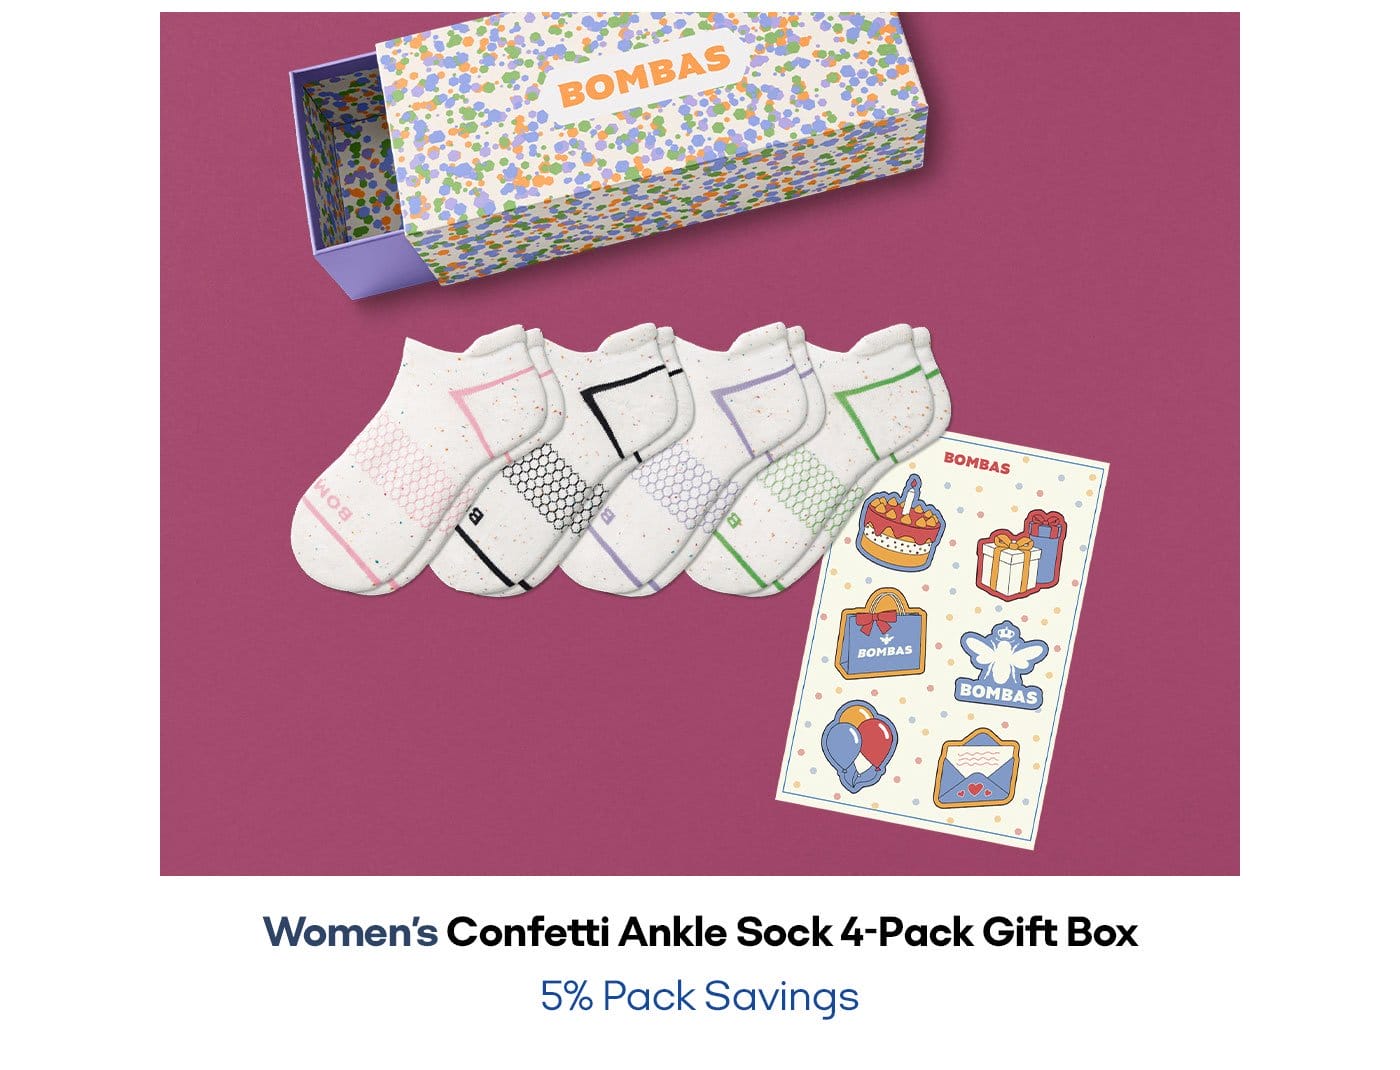 Women's Confetti Ankle Sock 4-Pack Gift Box